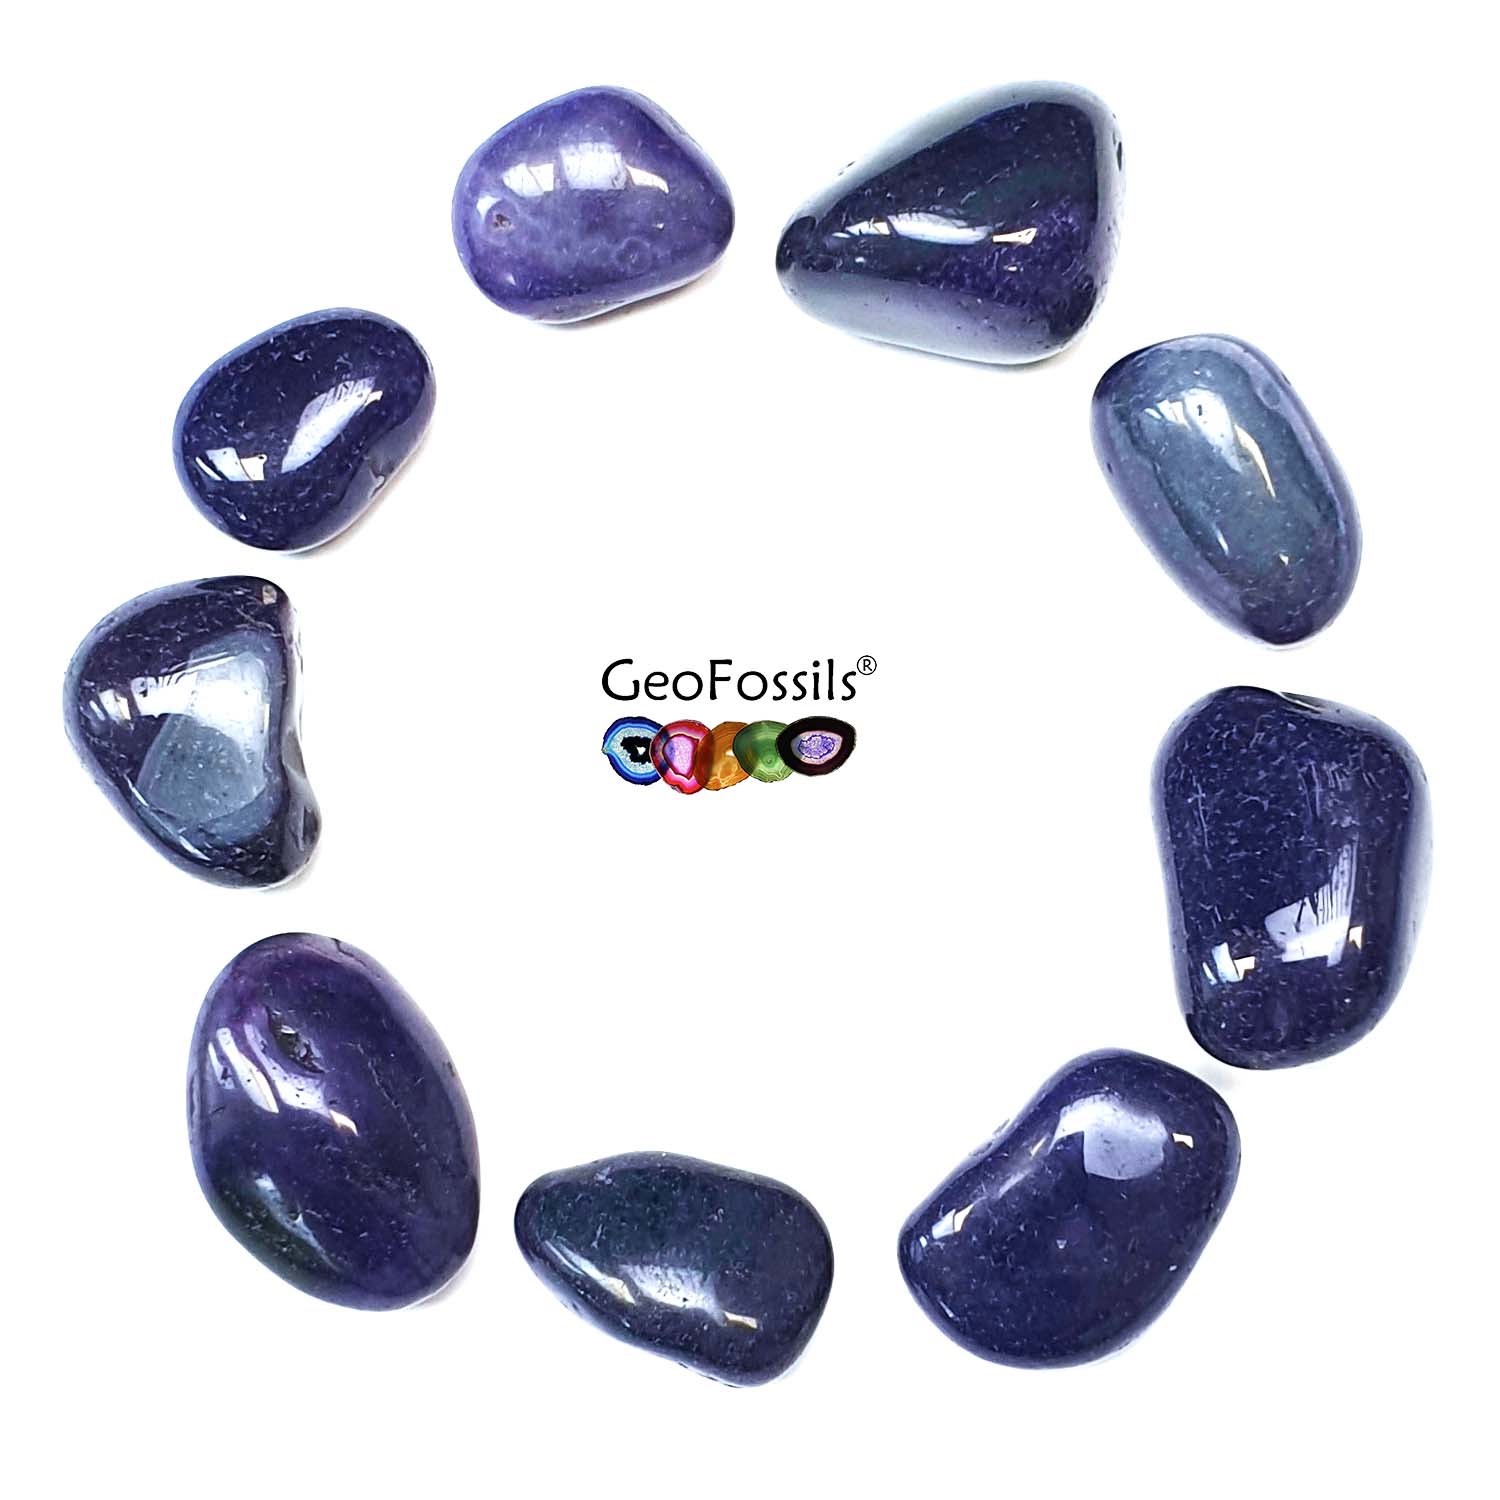 GeoFossils Dyed Purple Agate Polished Tumbled Stones